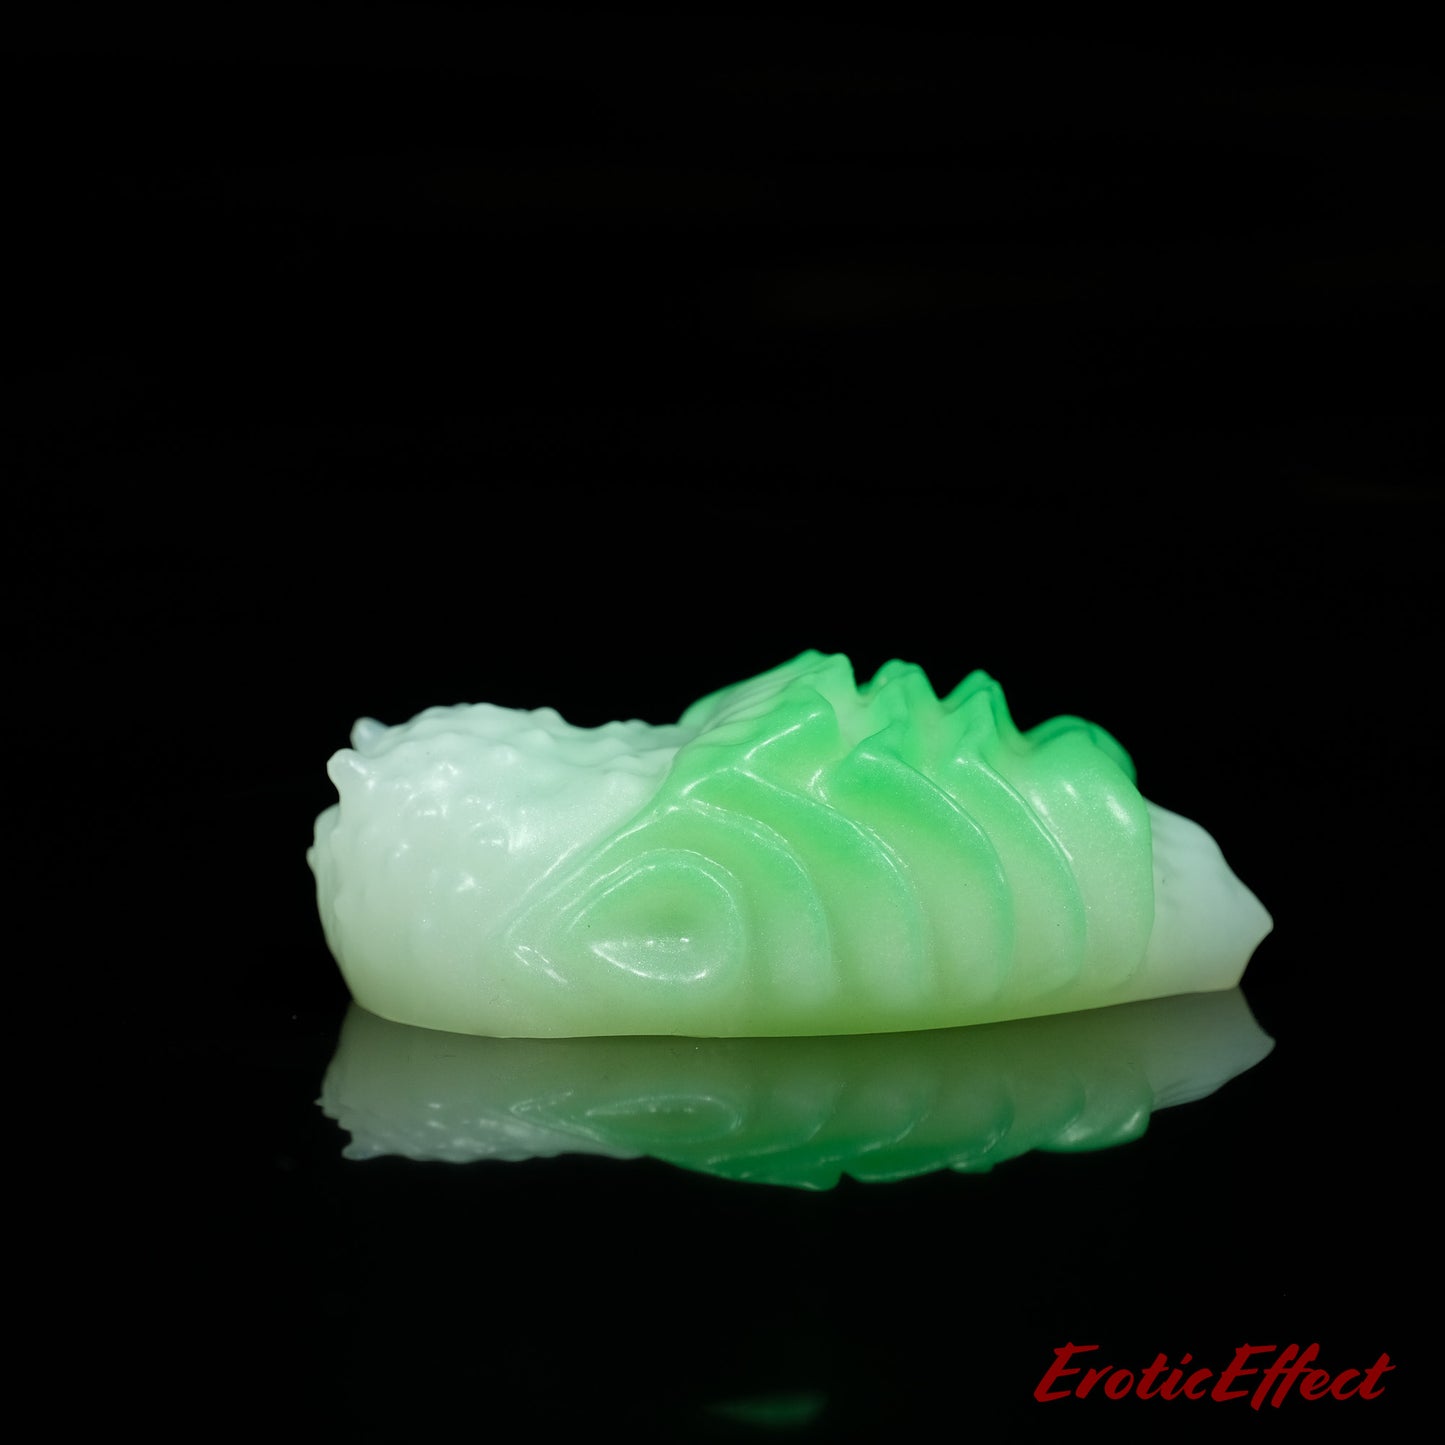 Edgar Silicone Grindable/Squishy - Super Soft - 156